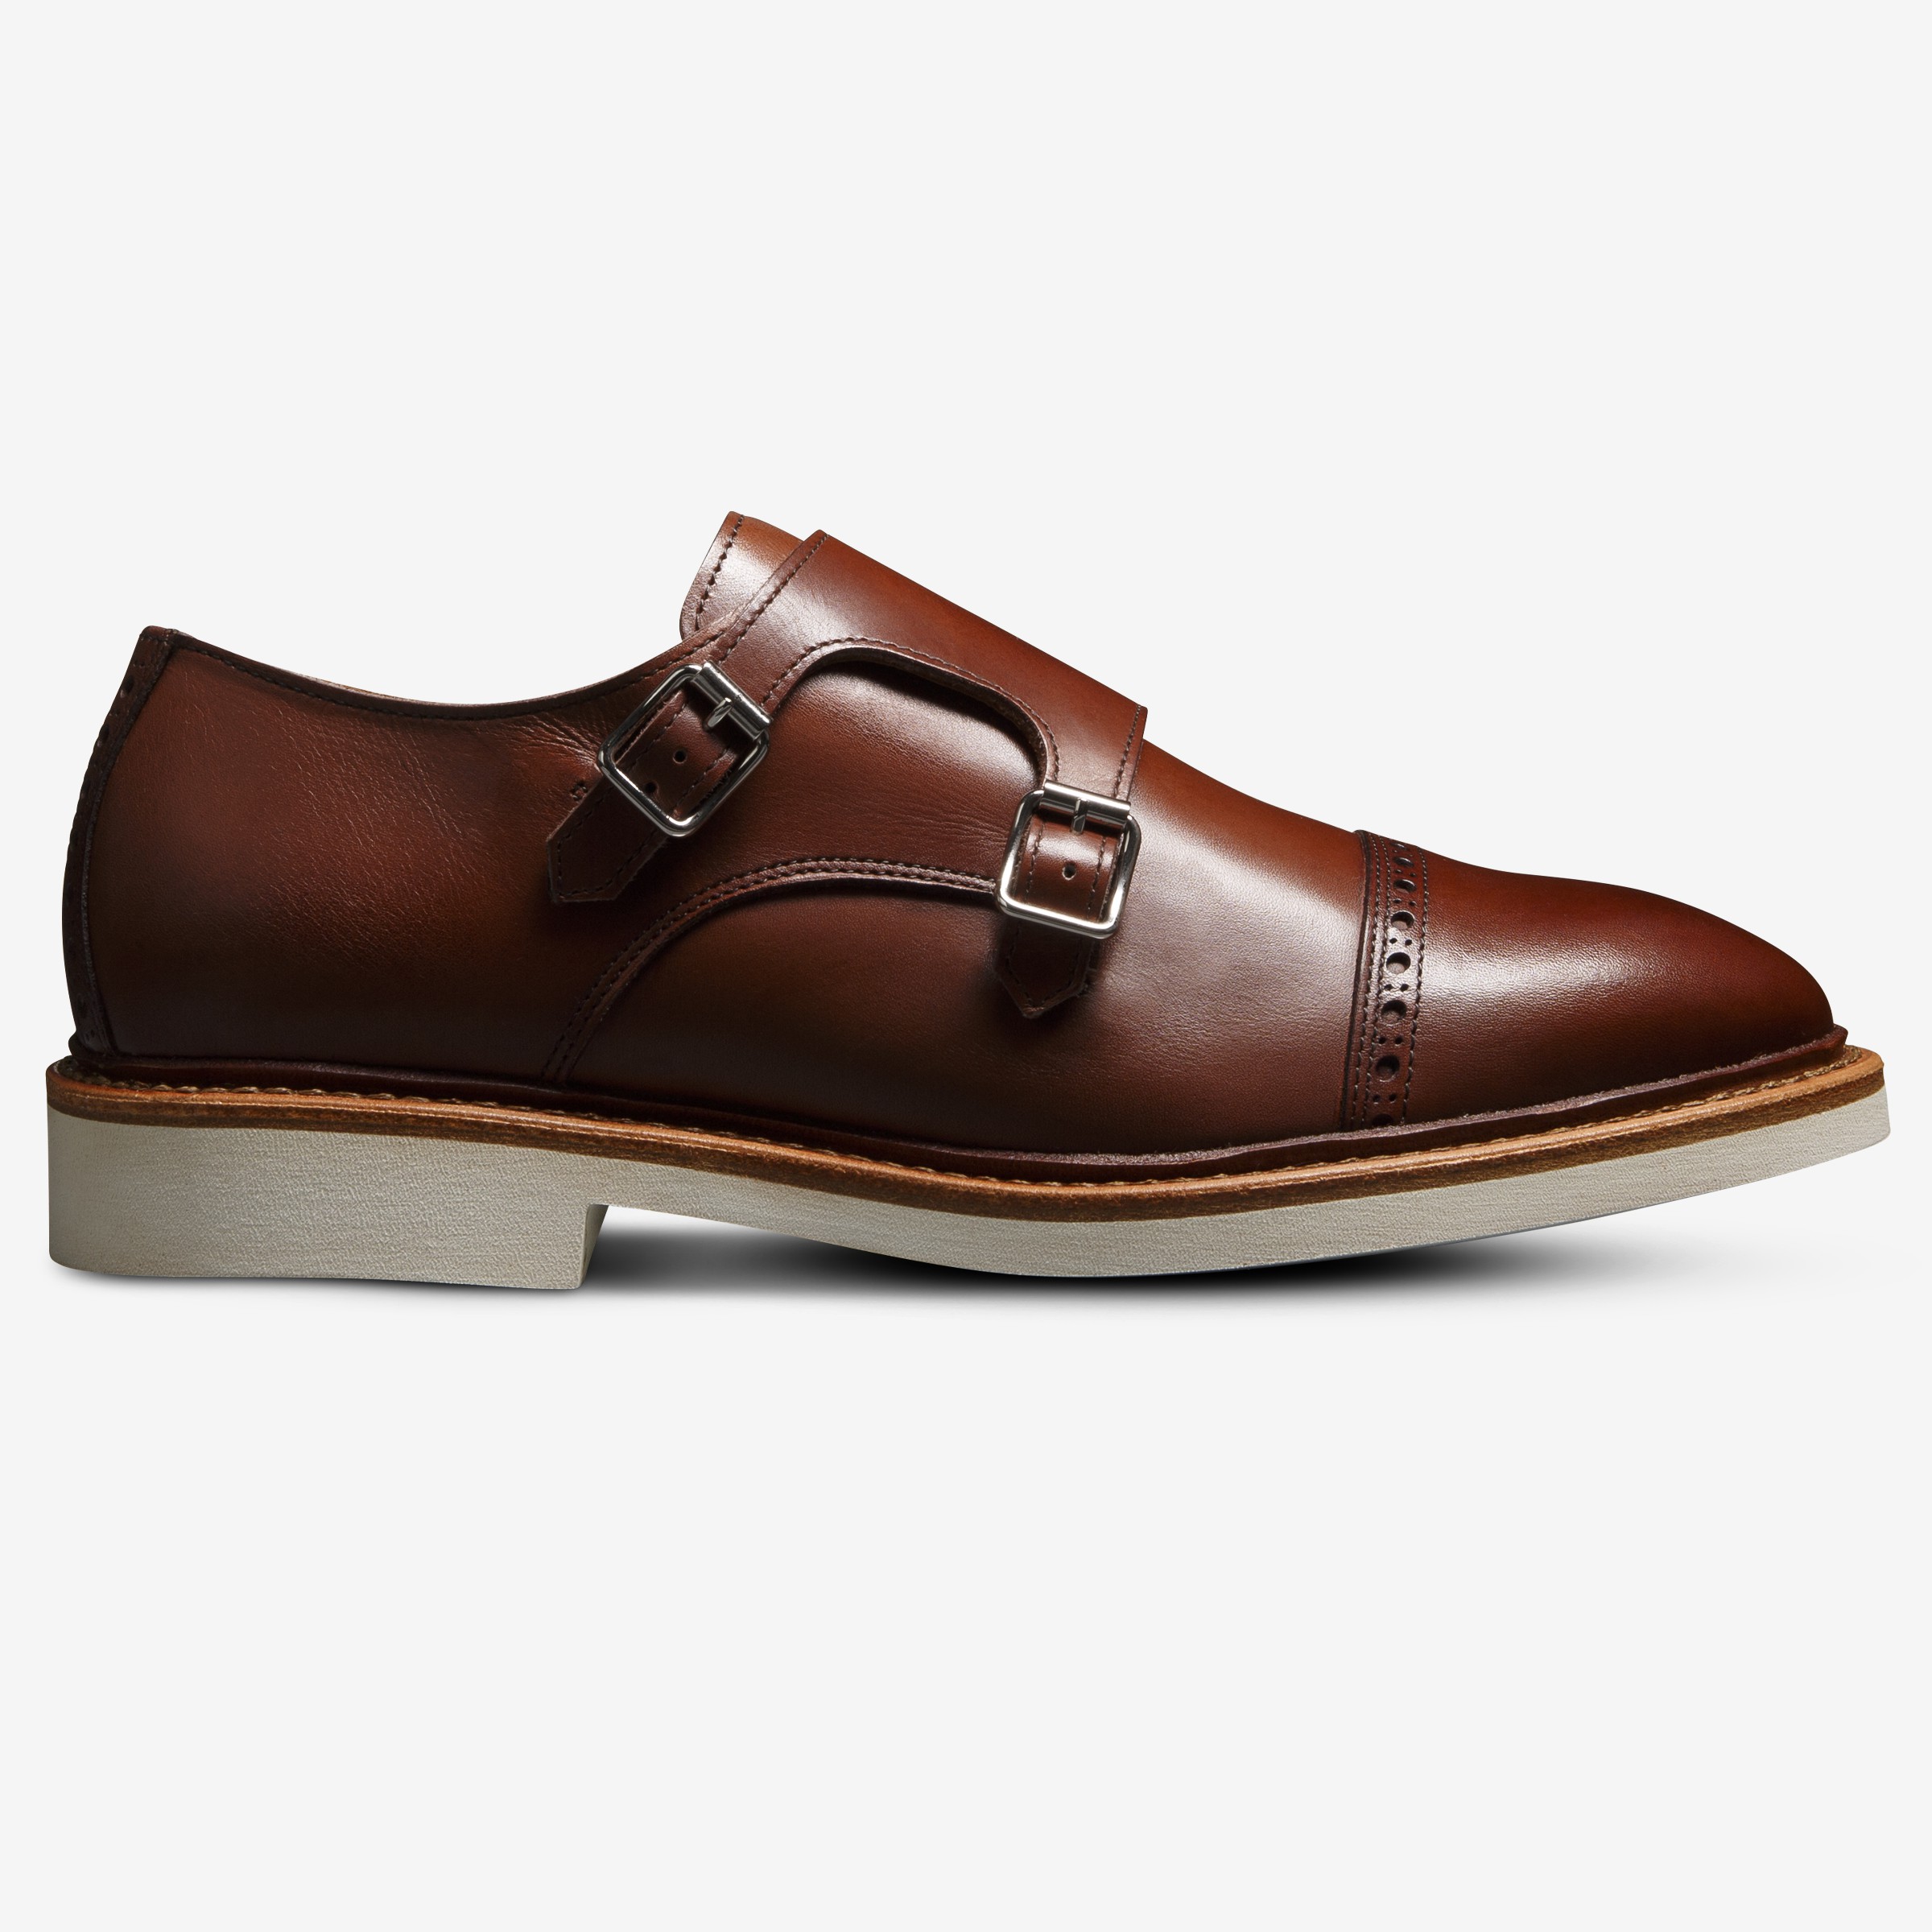 Charles Double Monk Strap